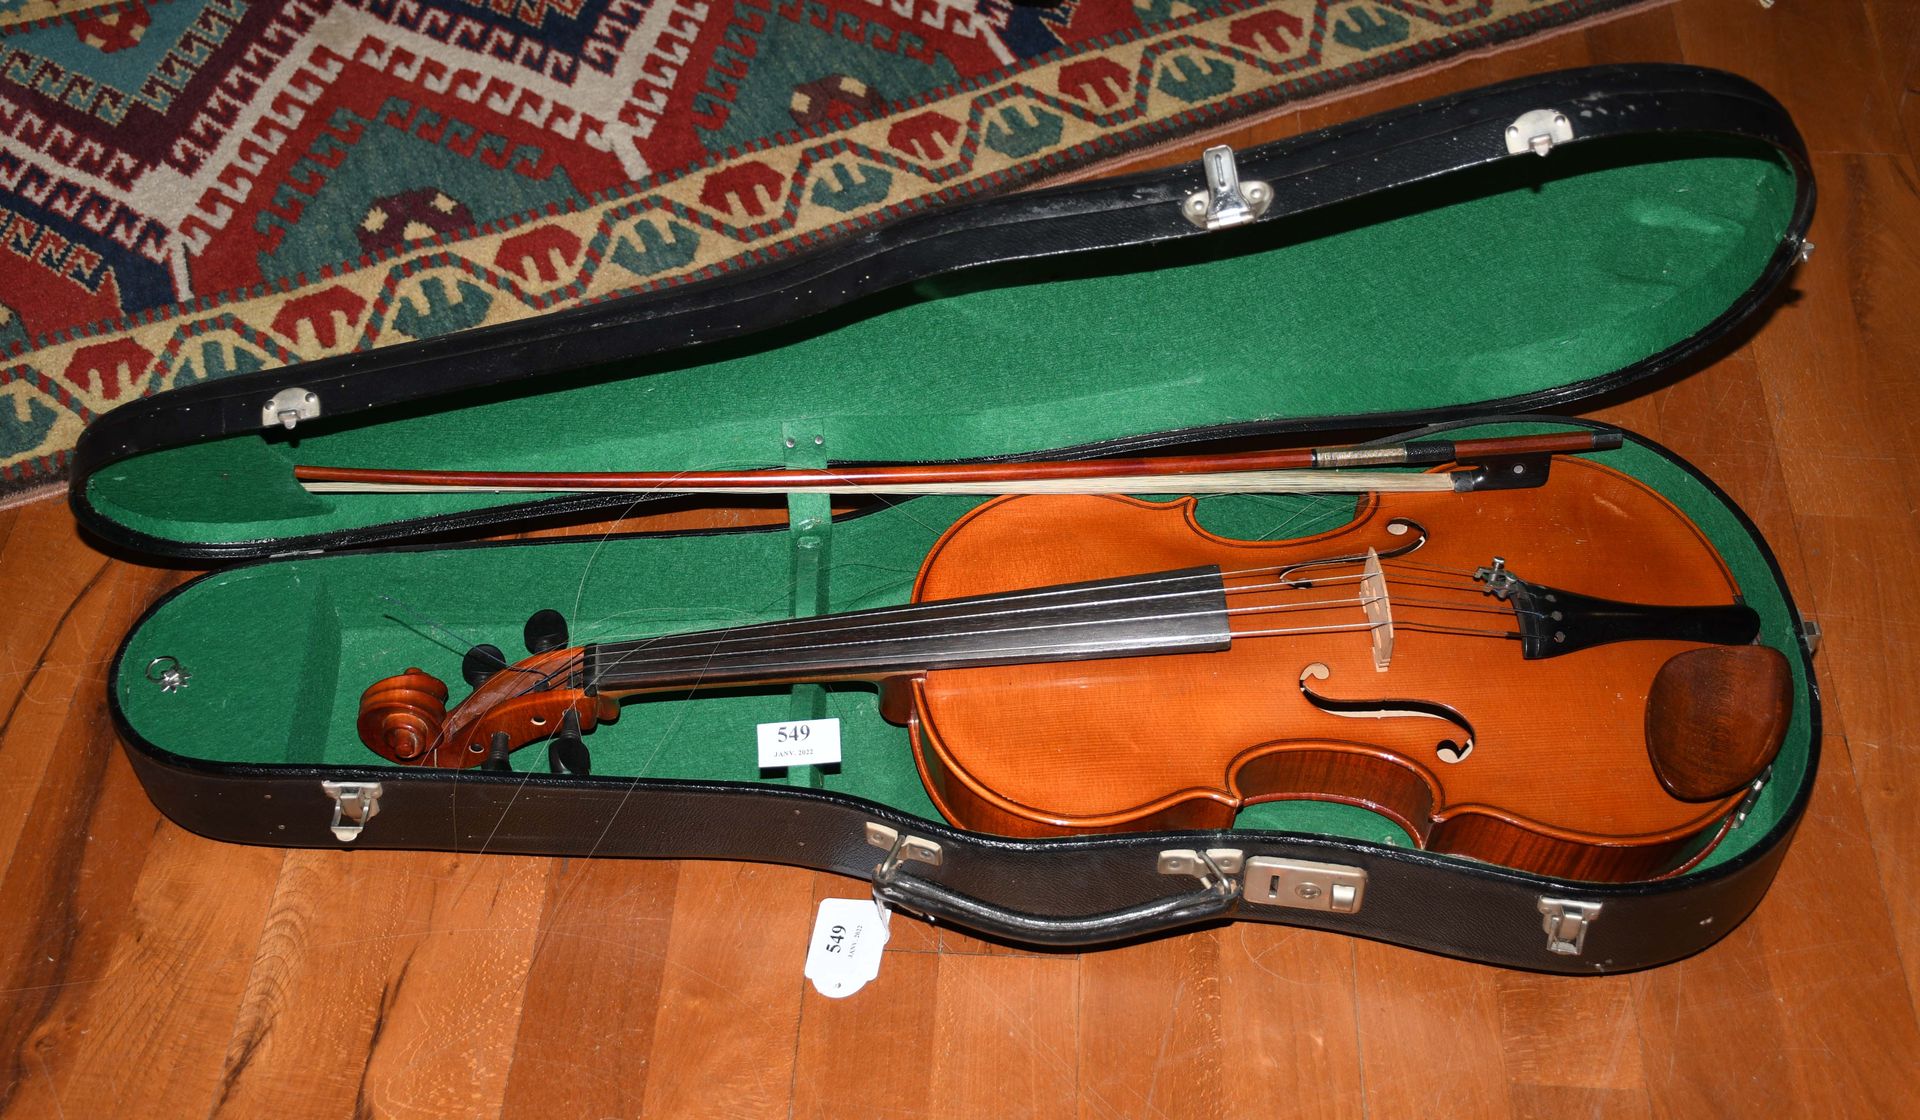 Null Alto violin and its bow - In its box